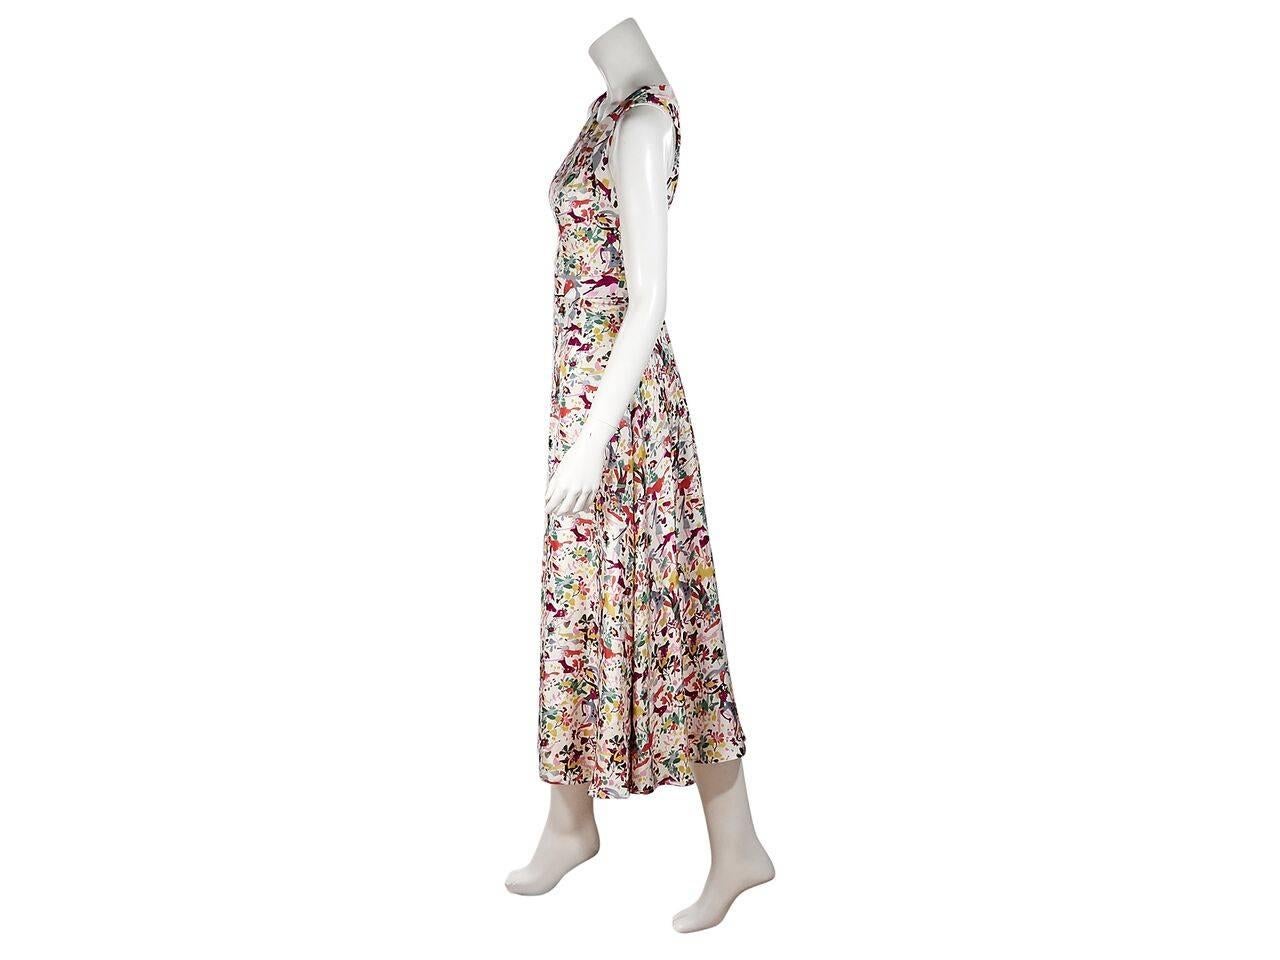 Product details:  Multicolor printed silk midi dress by Carolina Herrera.  Scoopneck.  Sleeveless.  Banded waist.  Concealed back zip closure.  
Condition: Pre-owned. New with tags.
Est. Retail $ 2,790.00